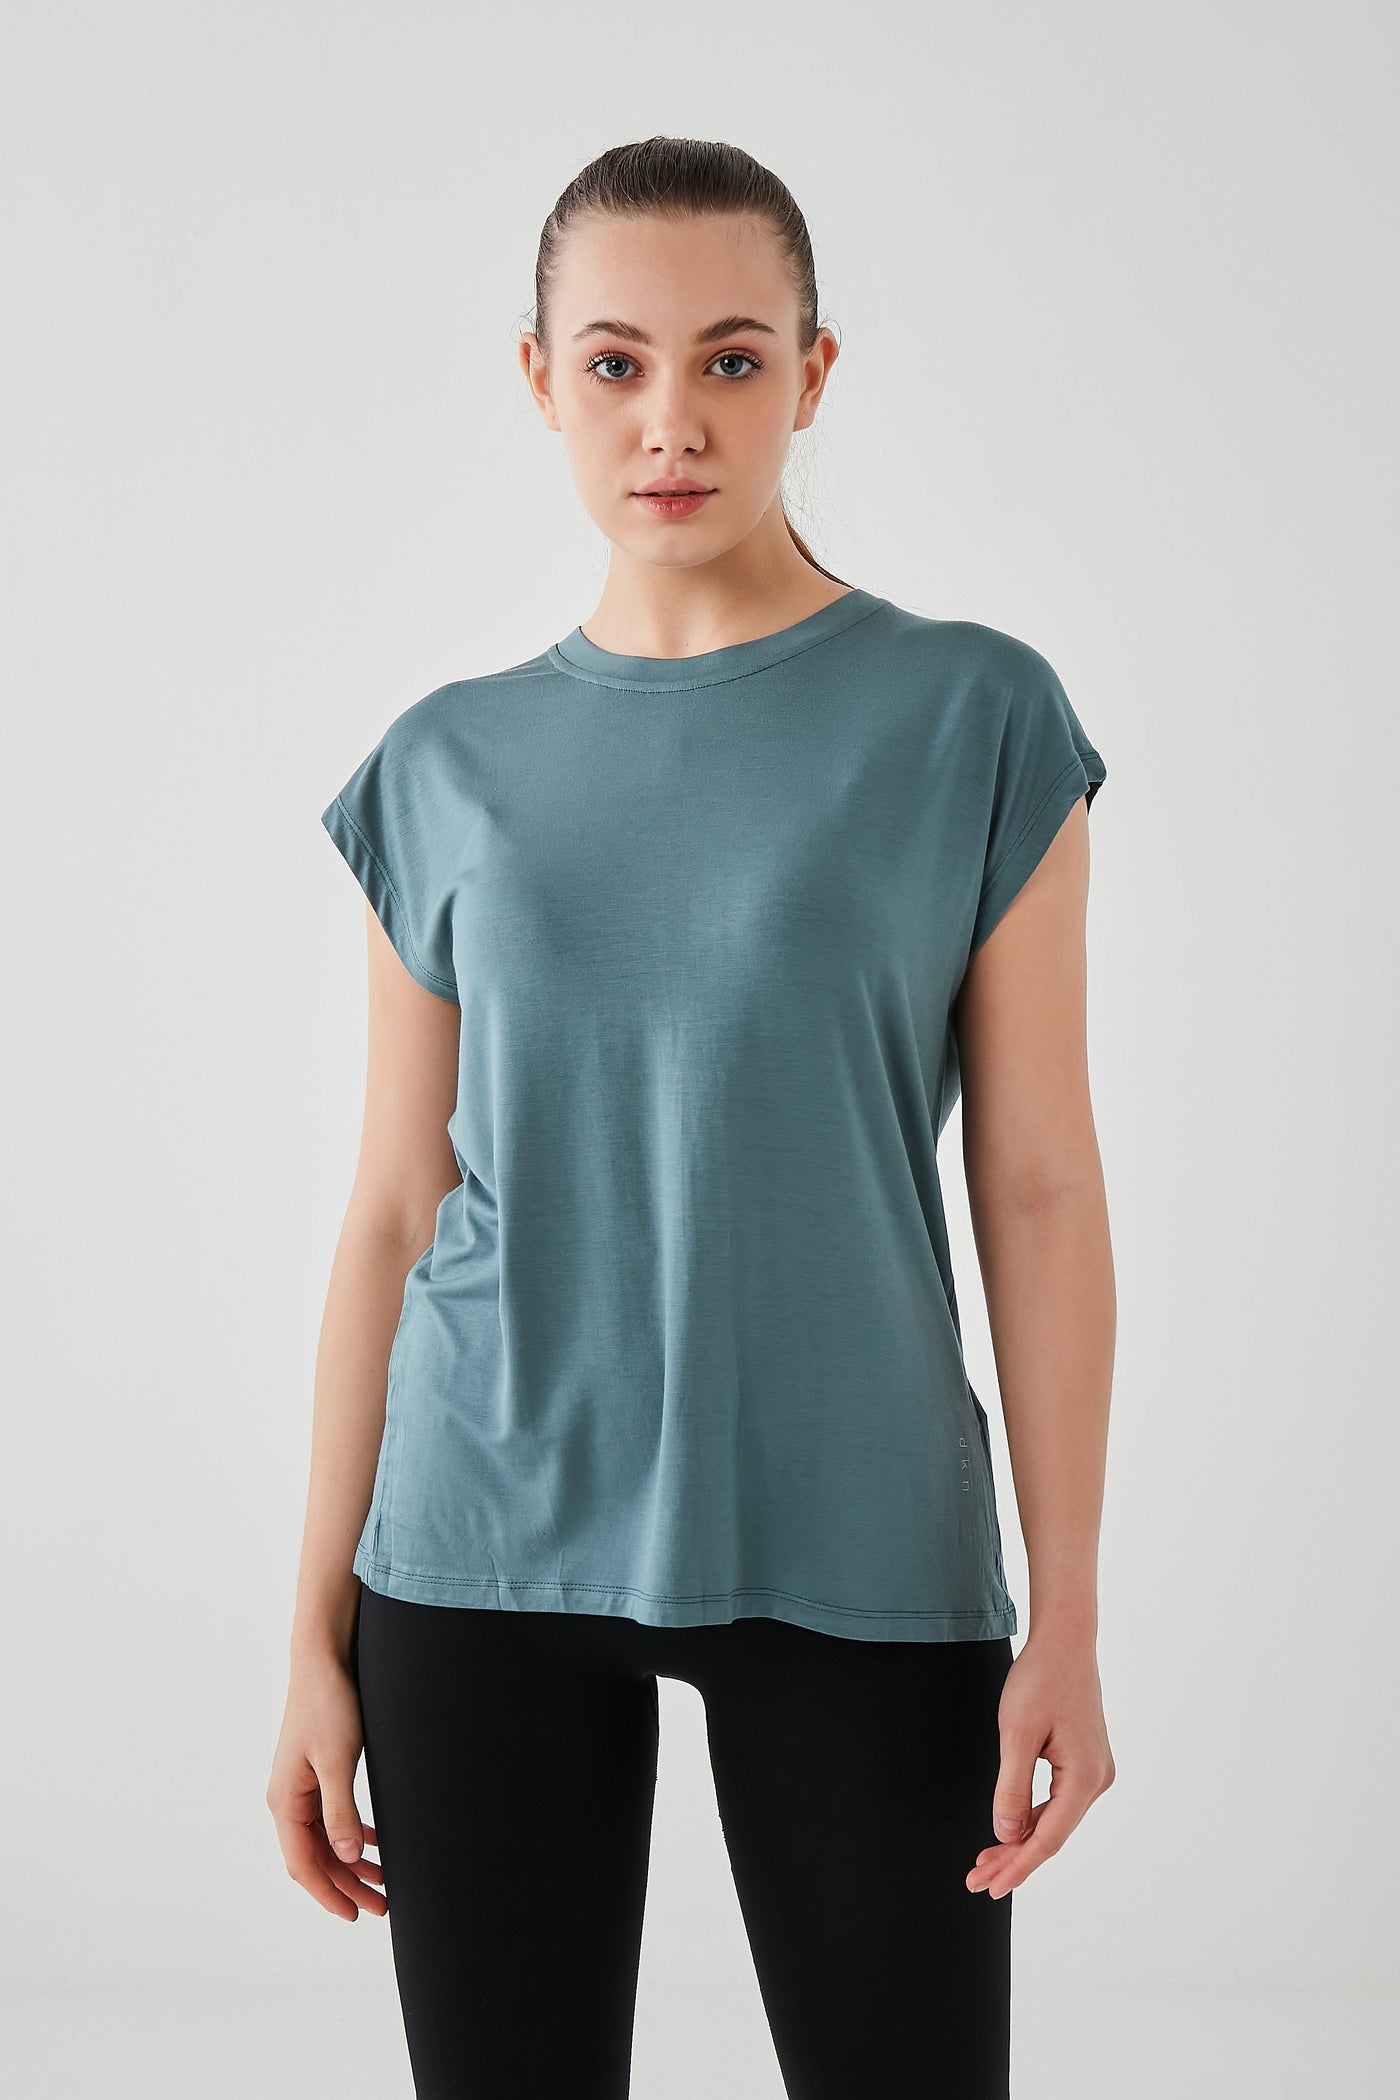 back top in turquoise